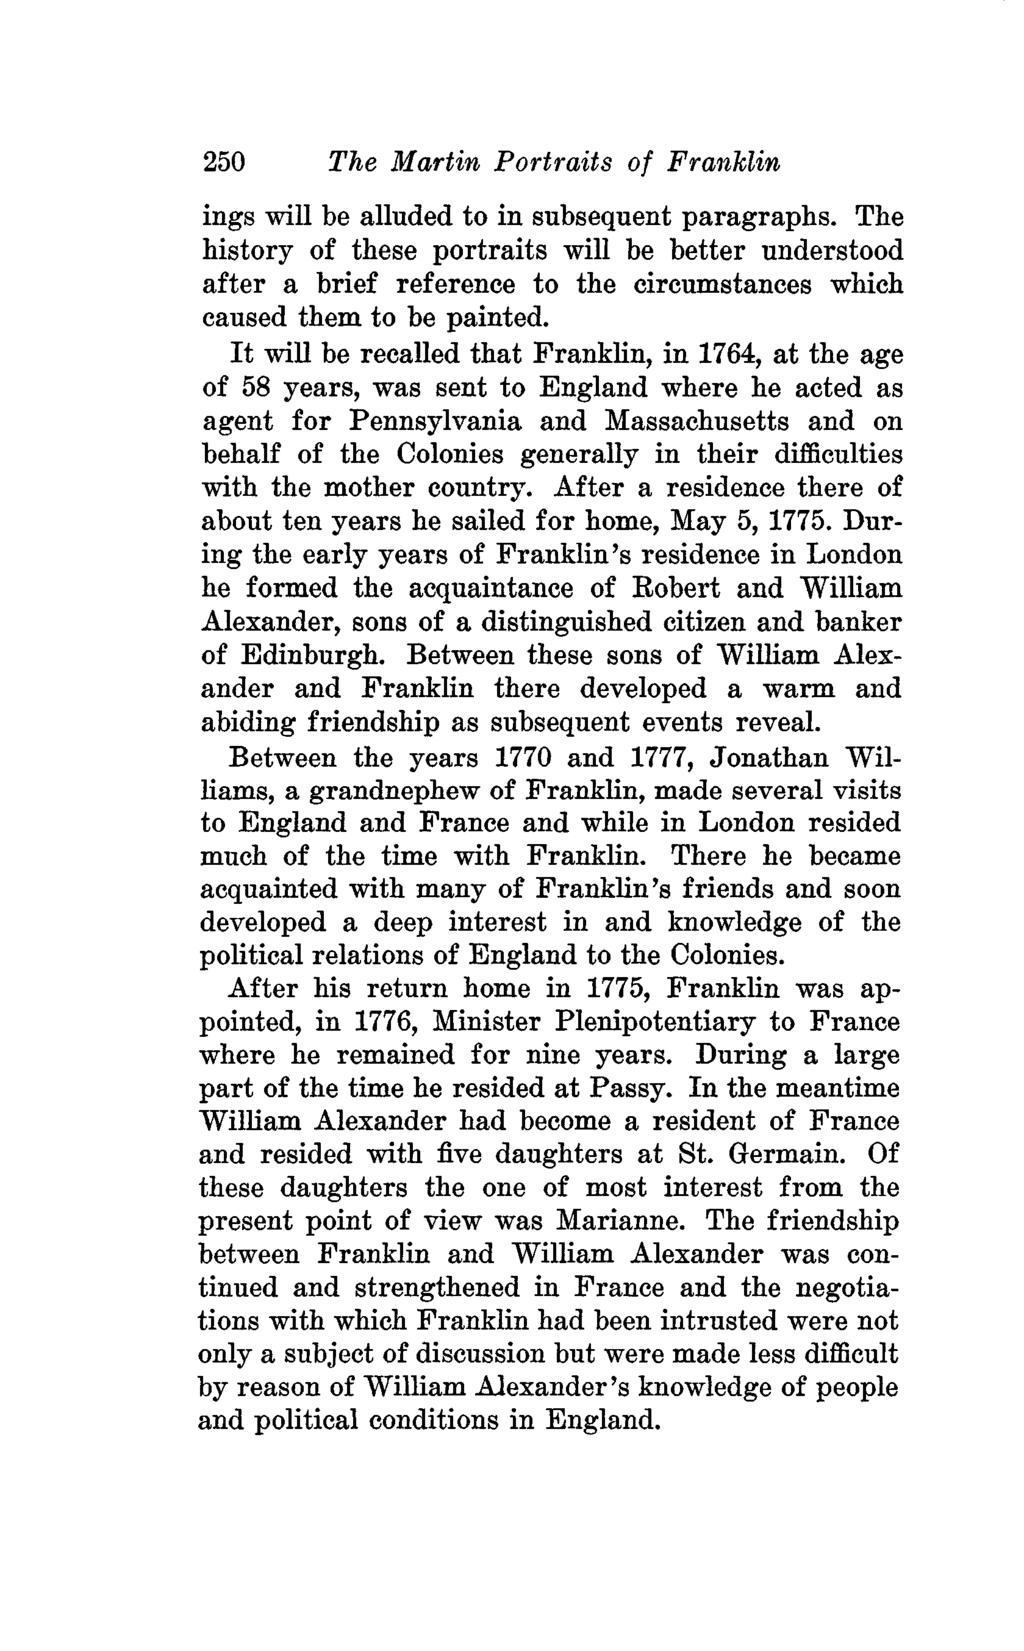 250 The Martin Portraits of Franklin ings will be alluded to in subsequent paragraphs.